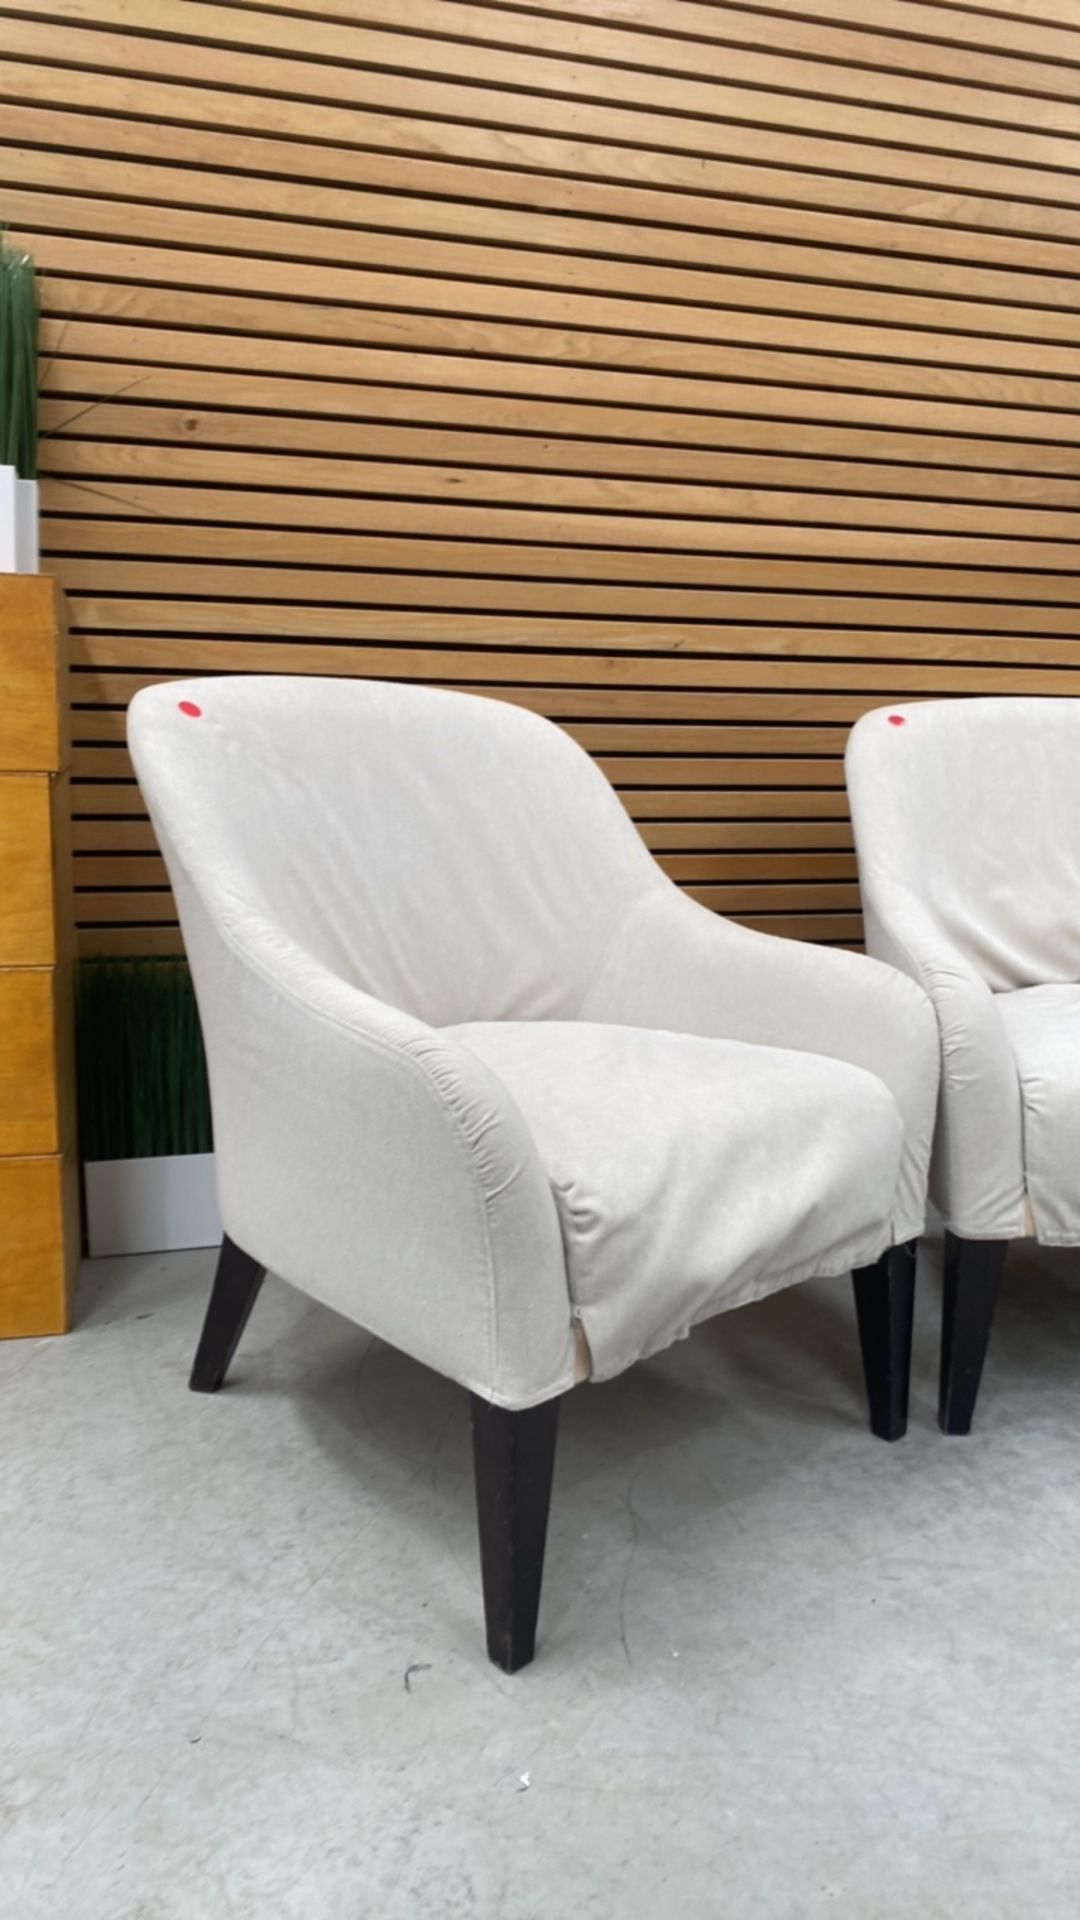 Set Of 2 Cream Upholstered Armchairs - Image 3 of 4